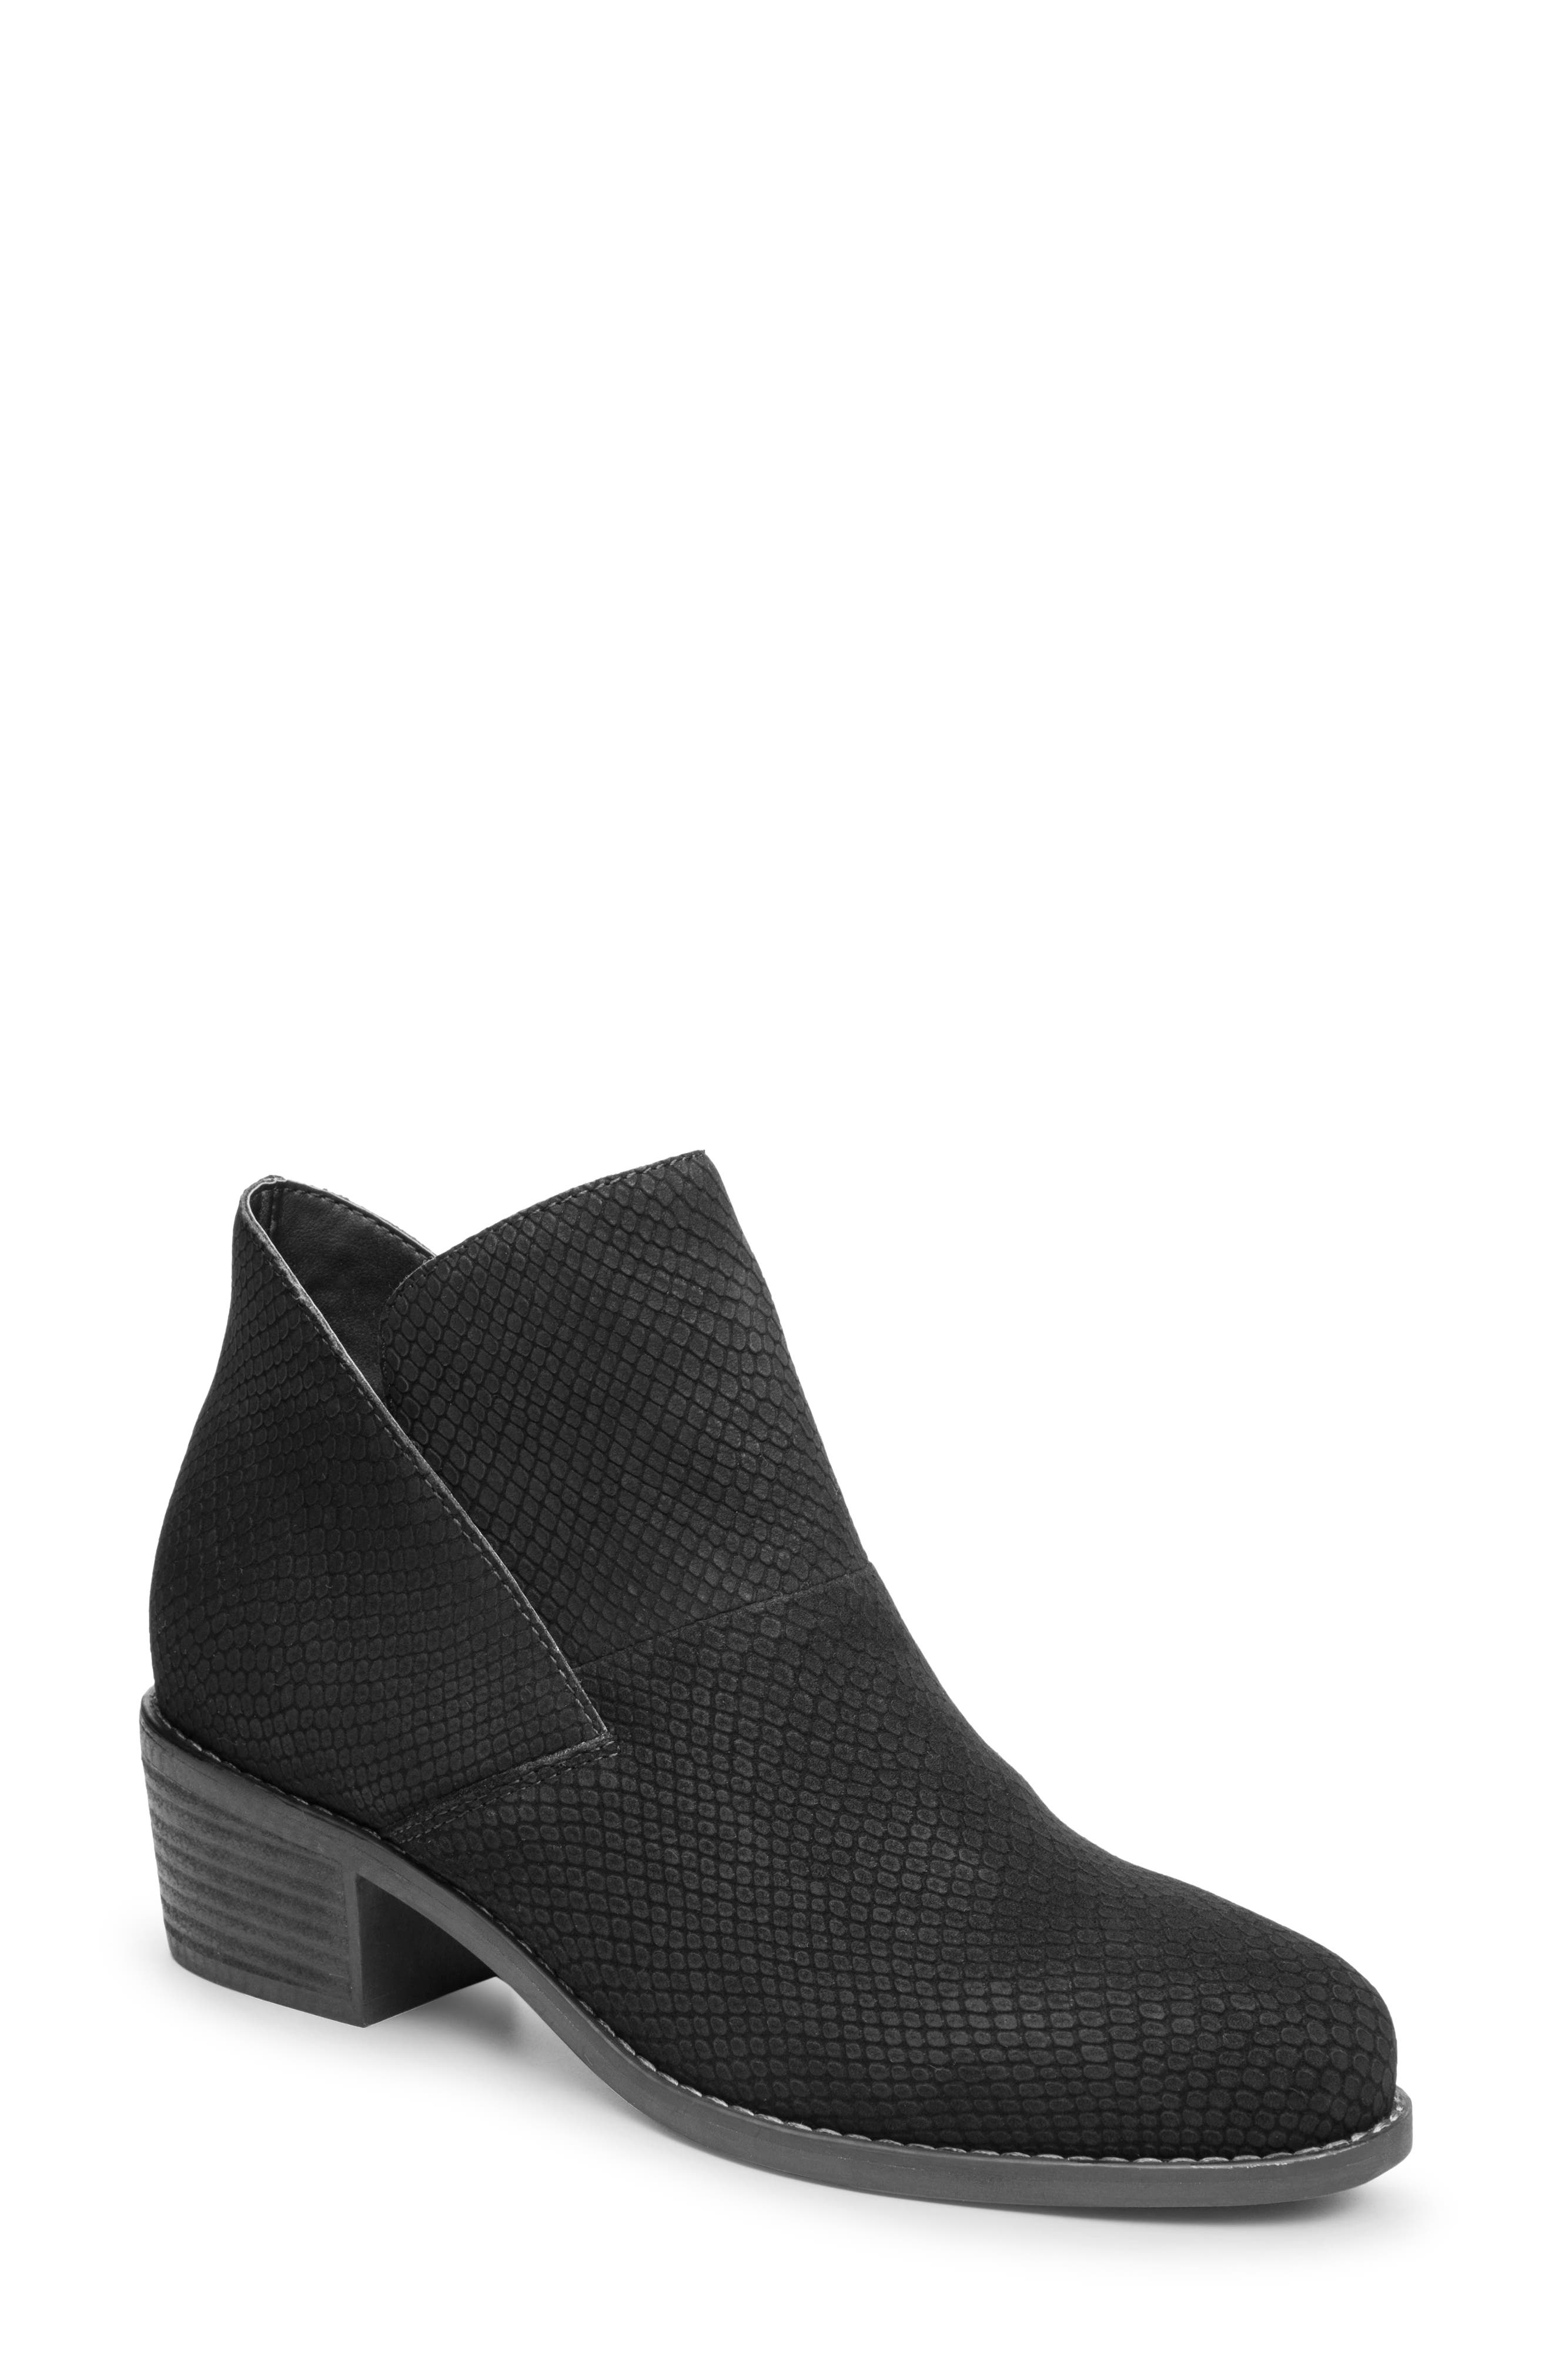 Women's Me Too Booties \u0026 Ankle Boots 